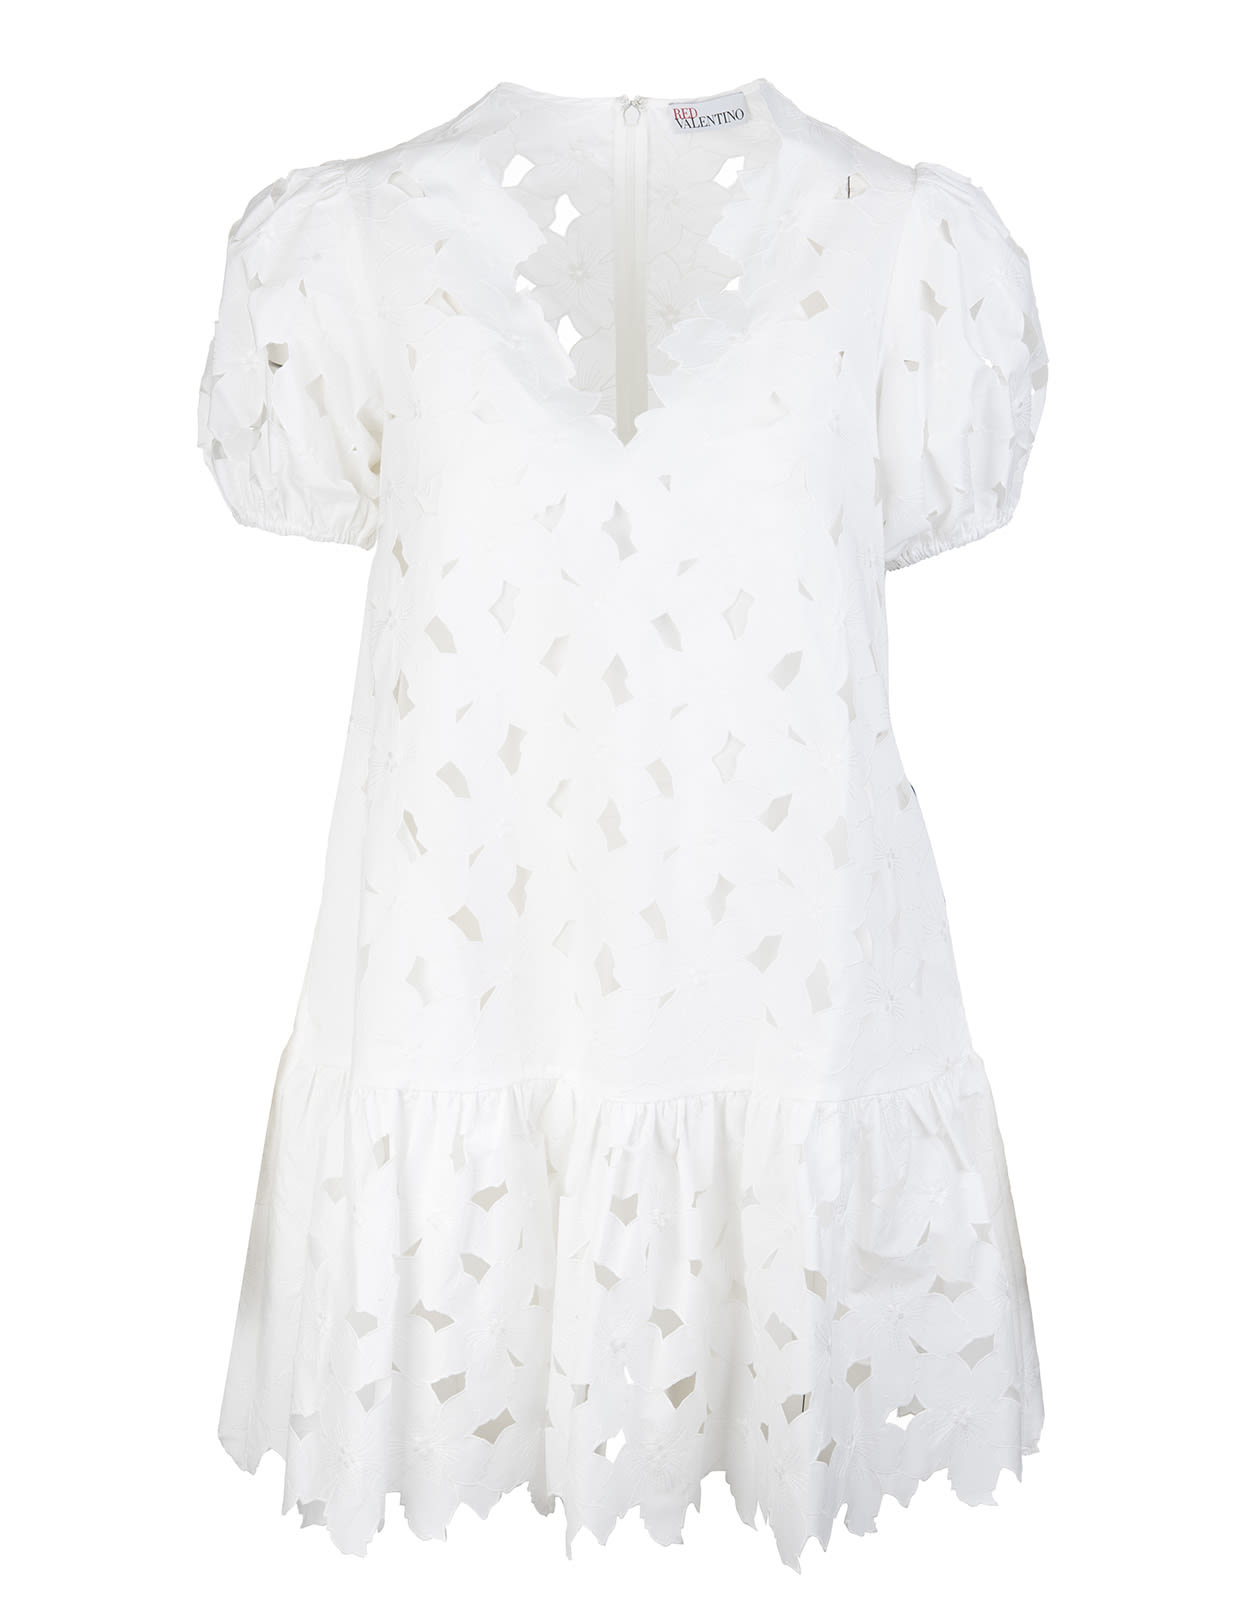 RED Valentino White Short Dress Woman With Cut-out Flowers